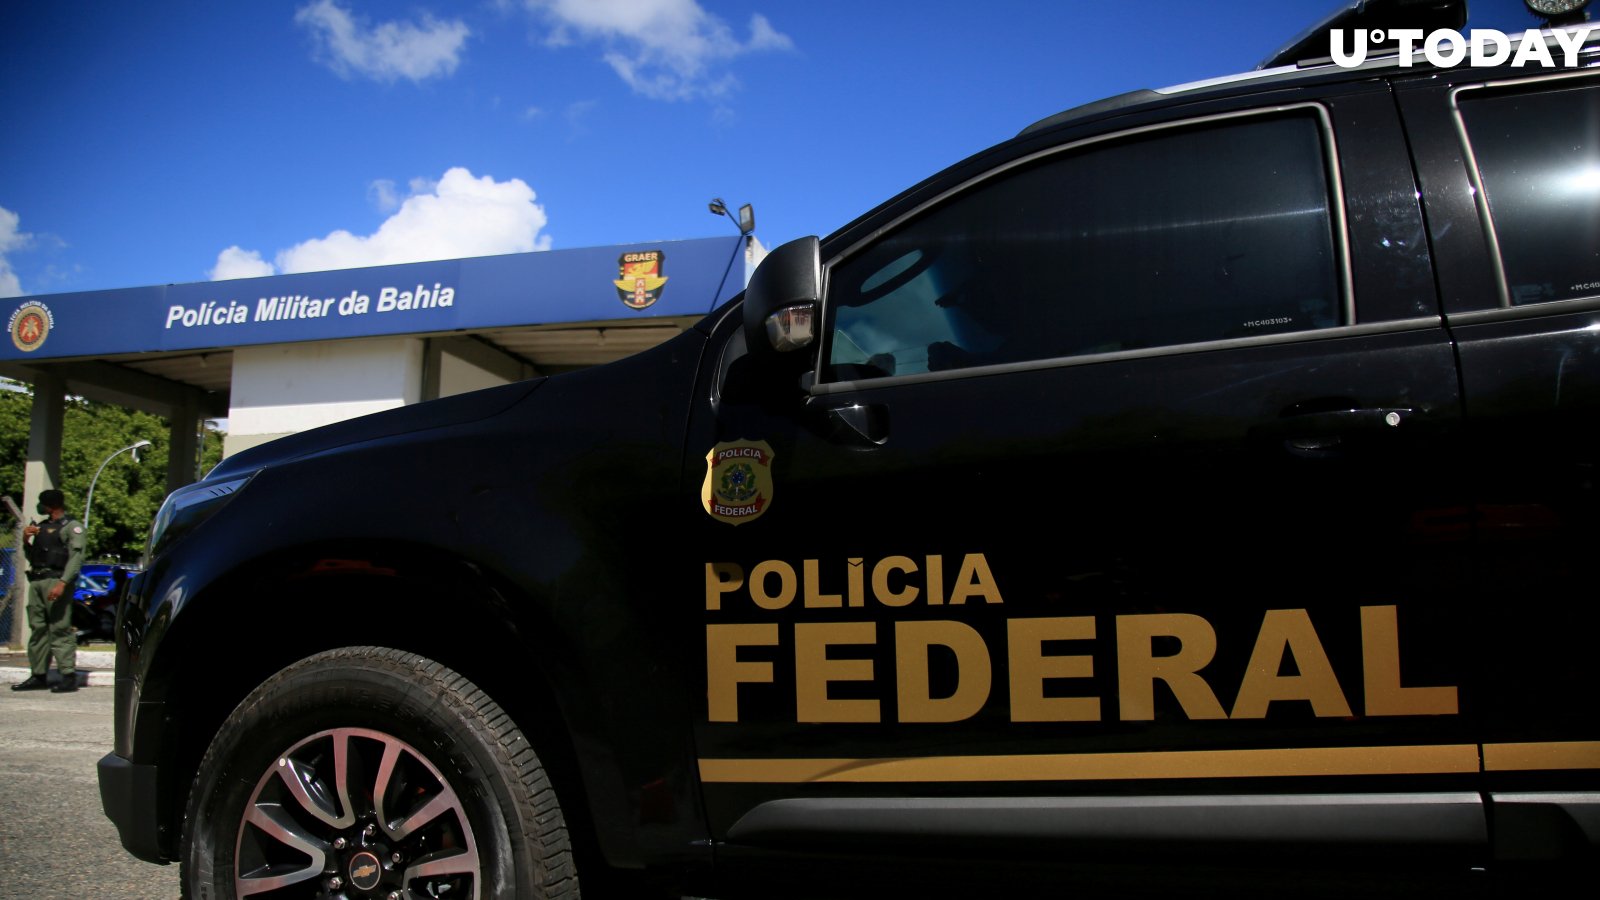 Bitcoin Gang Has Its Luxury Cars Seized by Brazil Police